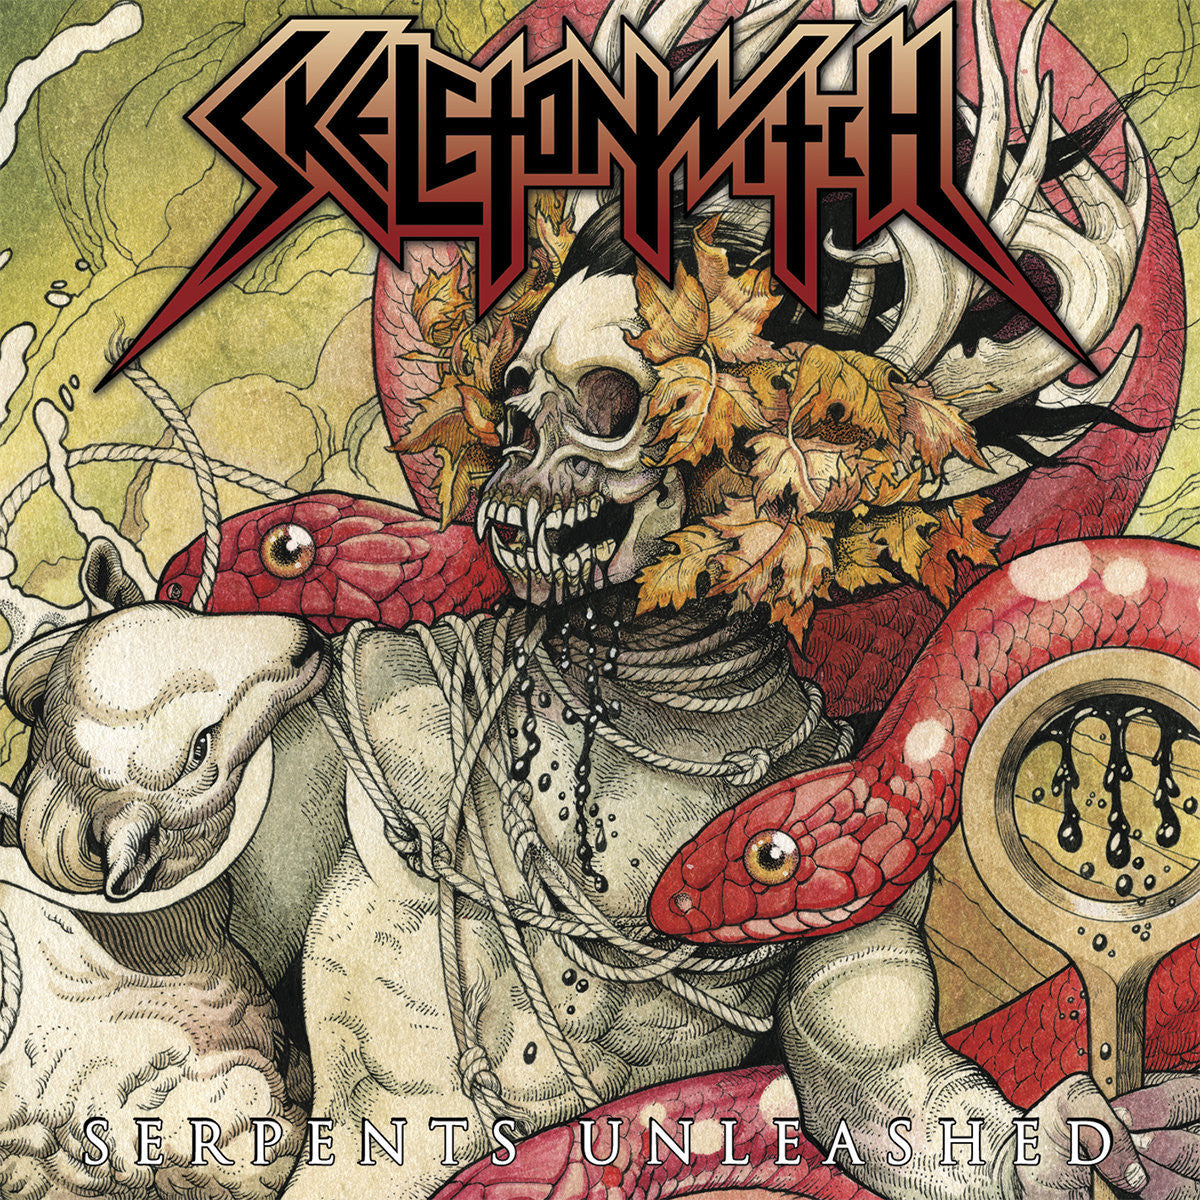 Skeletonwitch - Serpents Unleashed - New Vinyl Record 2017 Prosthetic Records Limited Edition Silver Vinyl Reissue (500 copies) - Thrash / Melodic Death Metal